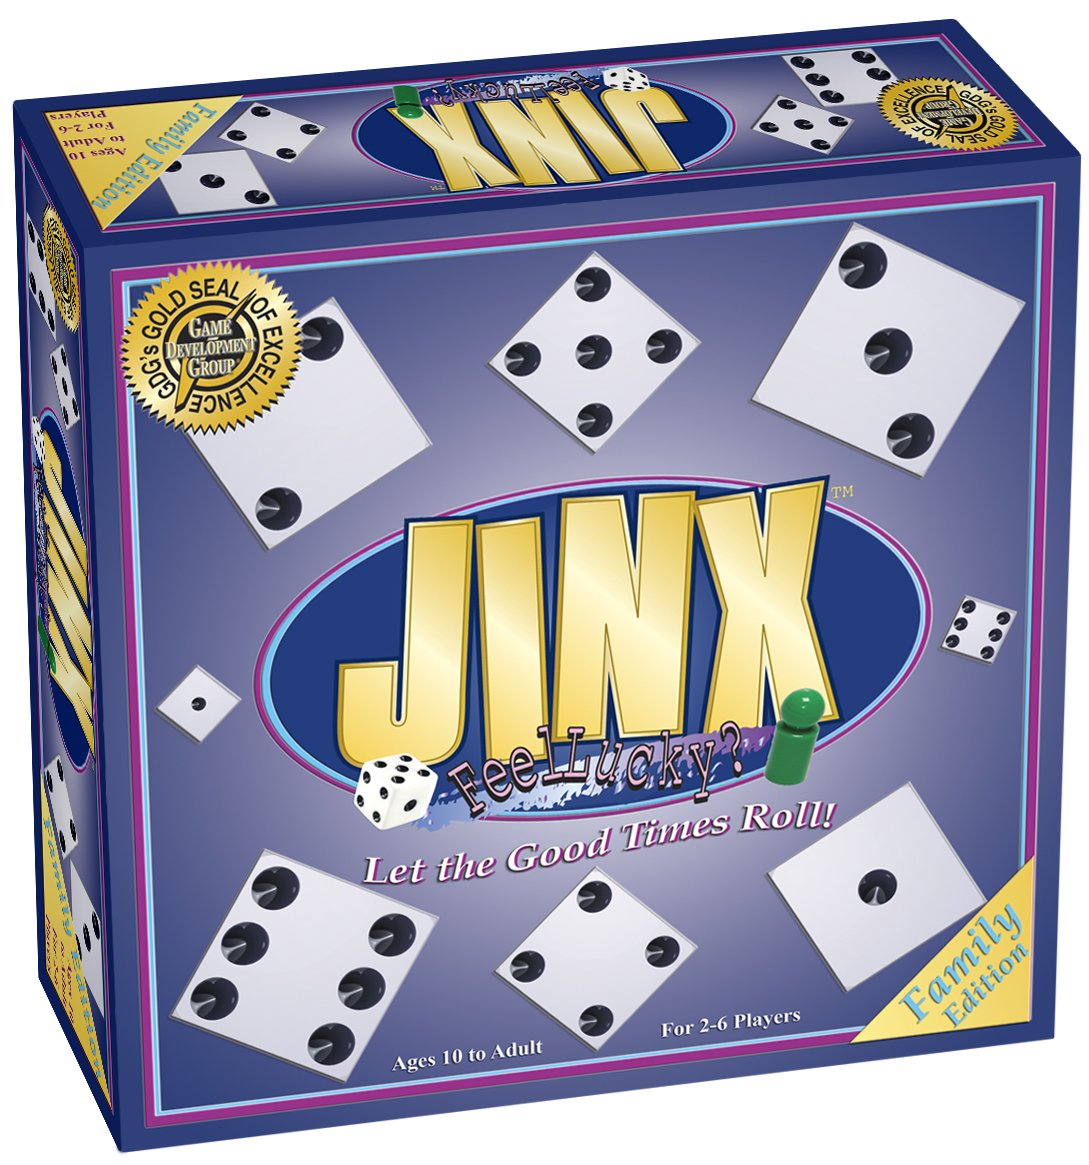 Jinx Board Game, A Game Where The Luck of The Dice Determines Your Fate. Get 'Jinxed' and Start from Scratch! Classic Party Game Night Fun for The Entire Family. Ages 10 to Adult.